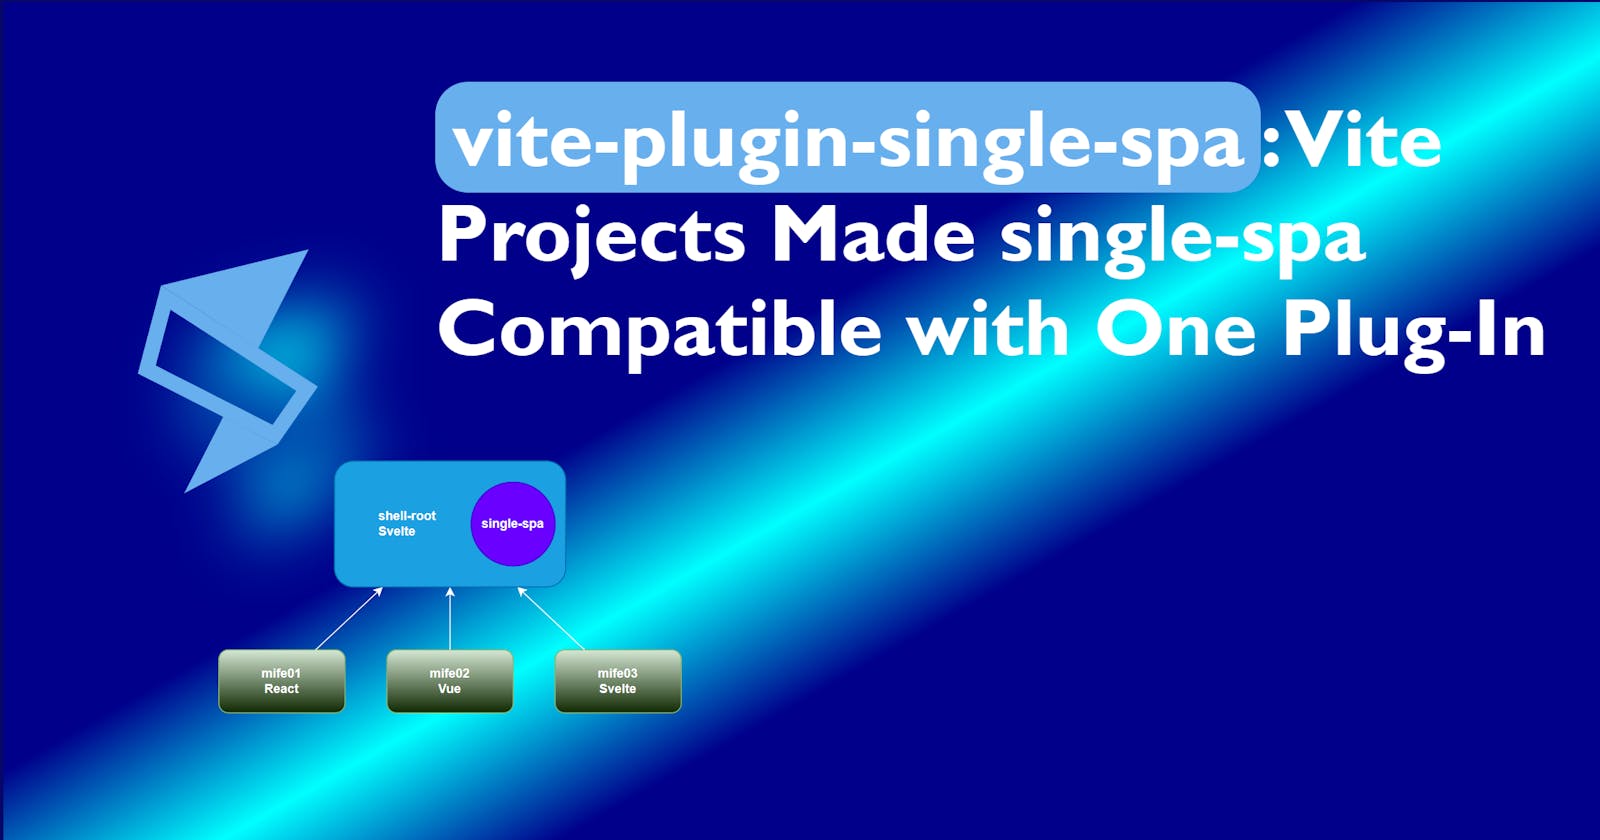 vite-plugin-single-spa:  Vite Projects Made single-spa Compatible with One Plug-In